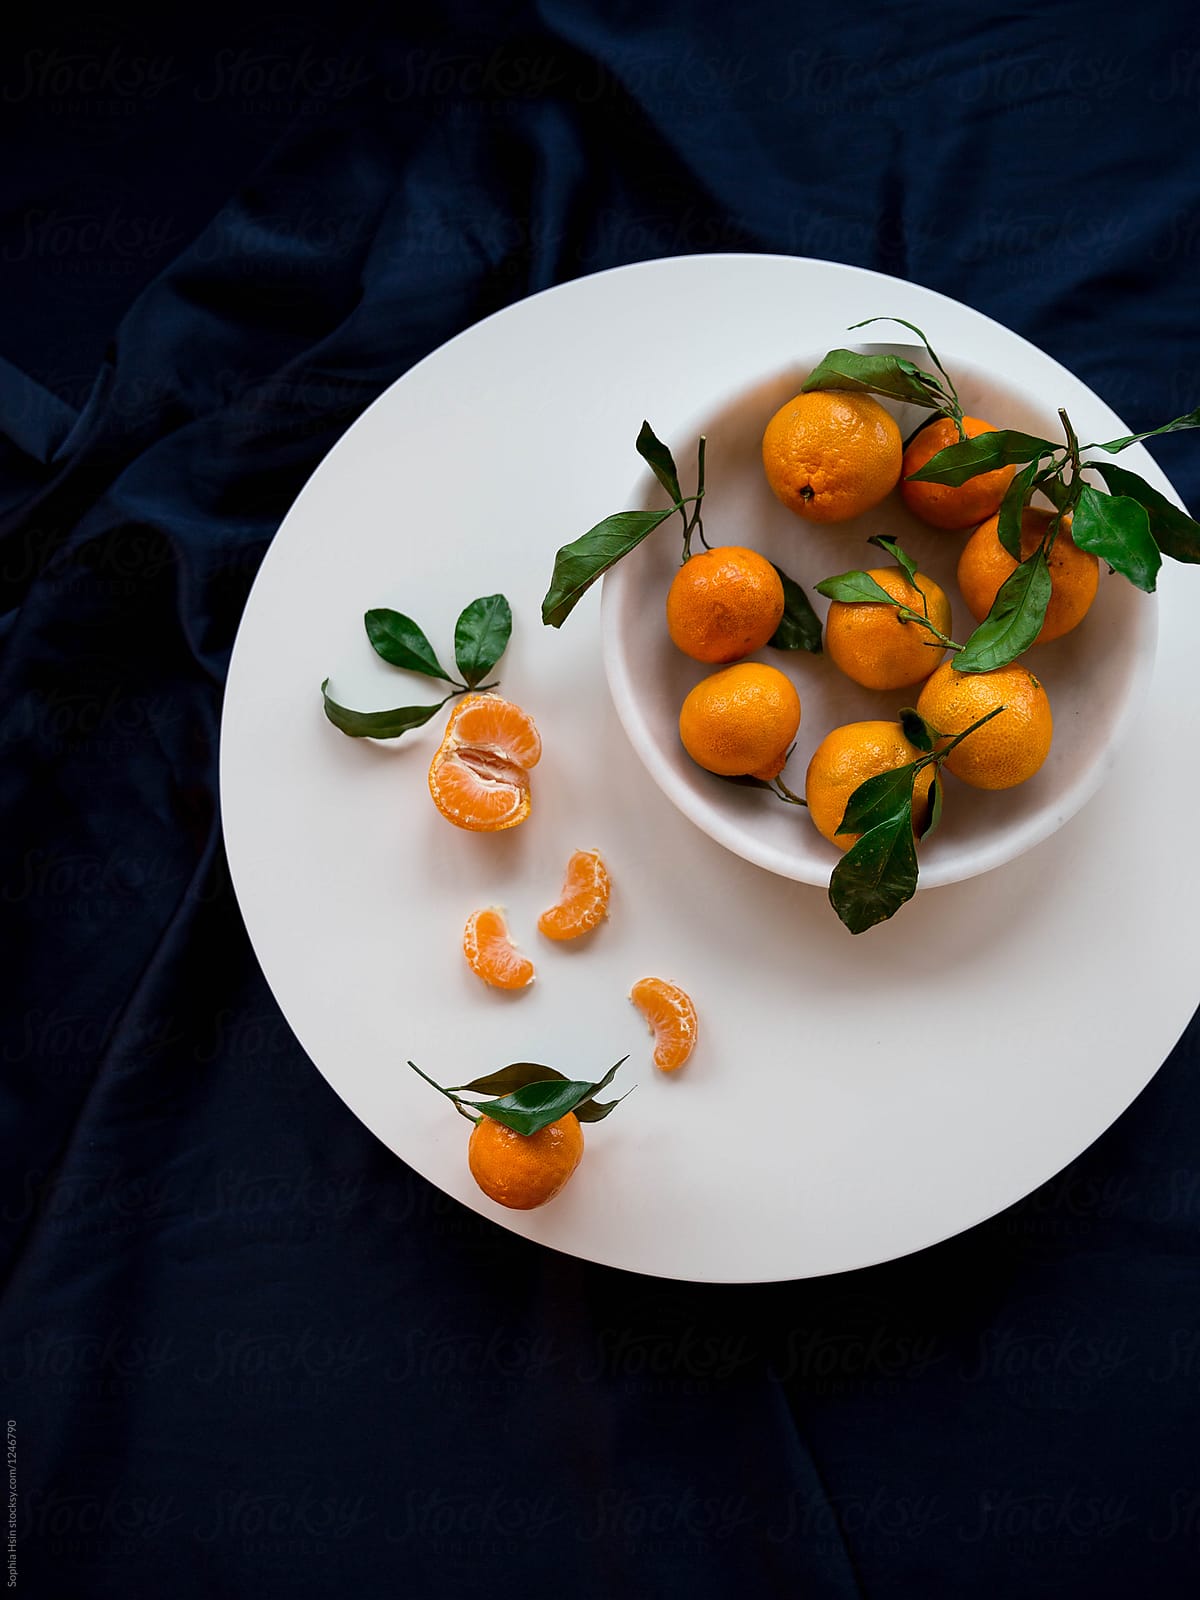 Satsumas in marble bowl on table with black background